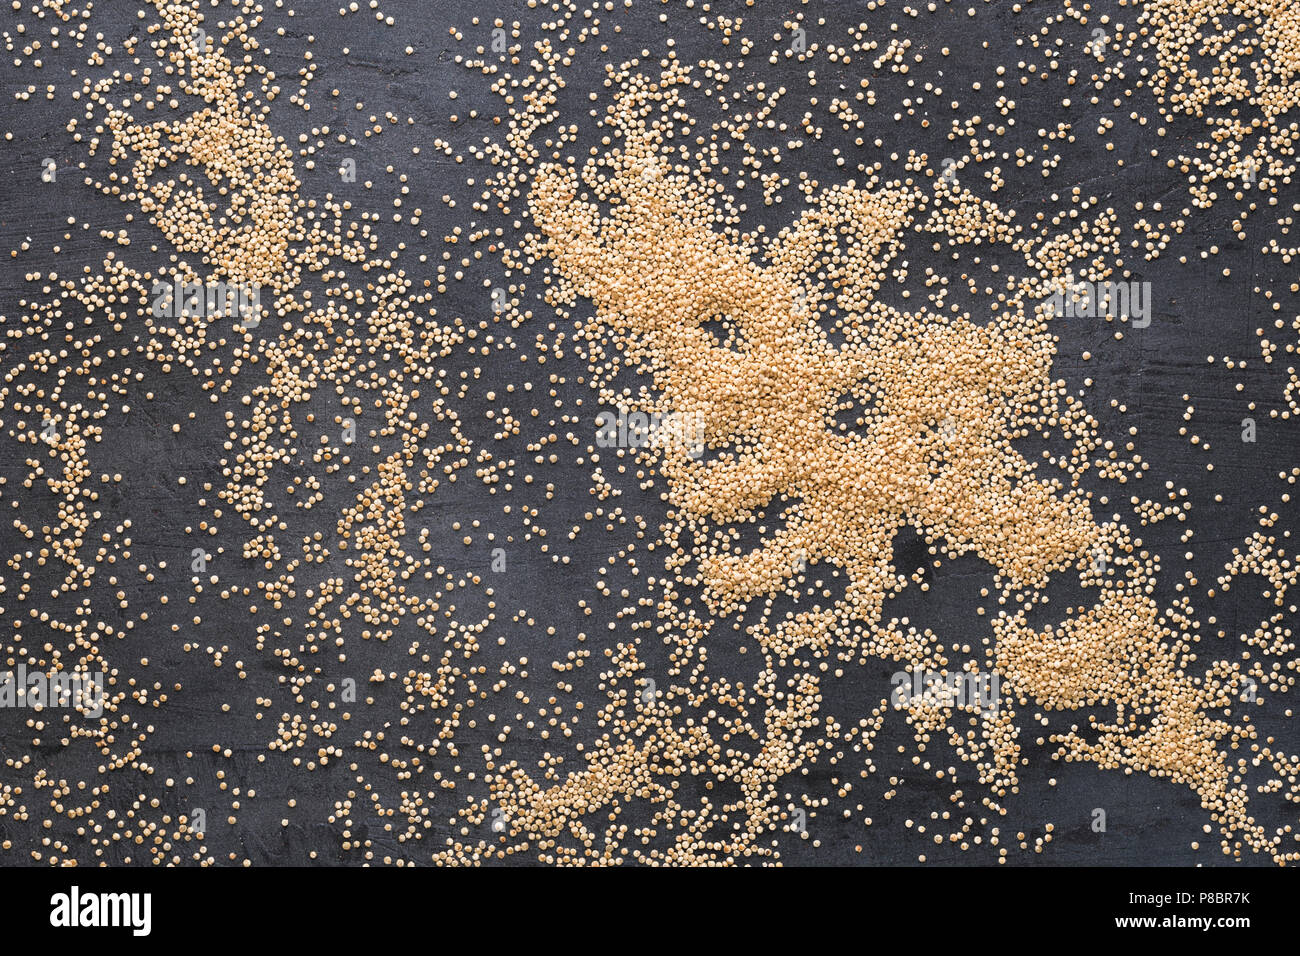 Heap of quinoa on a dark background, top view Stock Photo